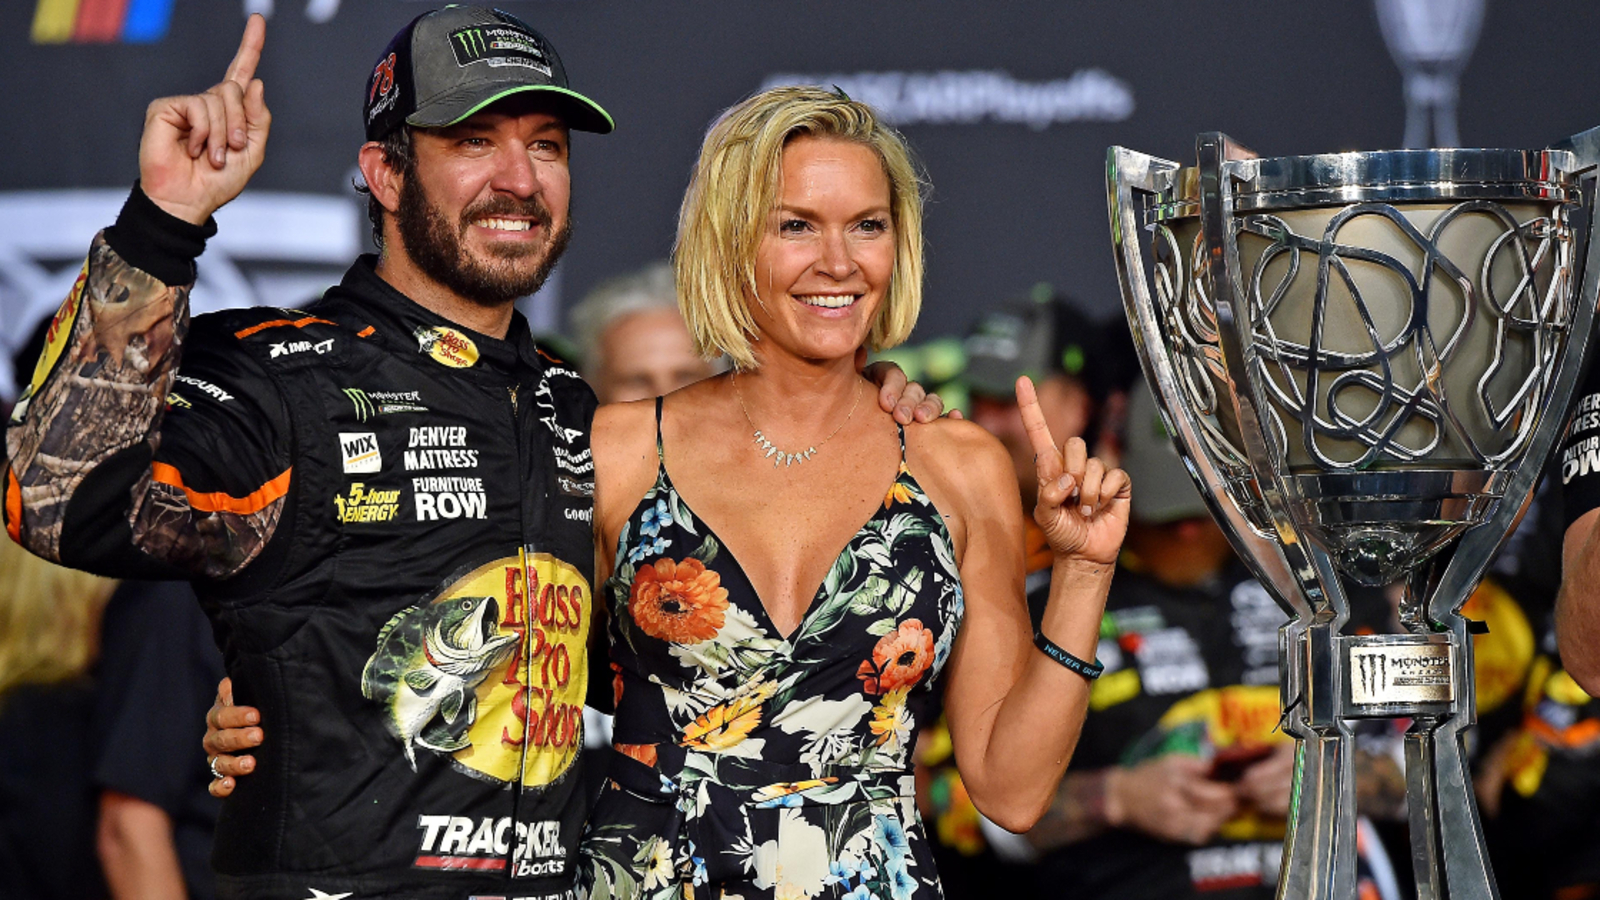 Sam Hunt Racing to honor Sherry Pollex with ‘Sherry Strong’ paint